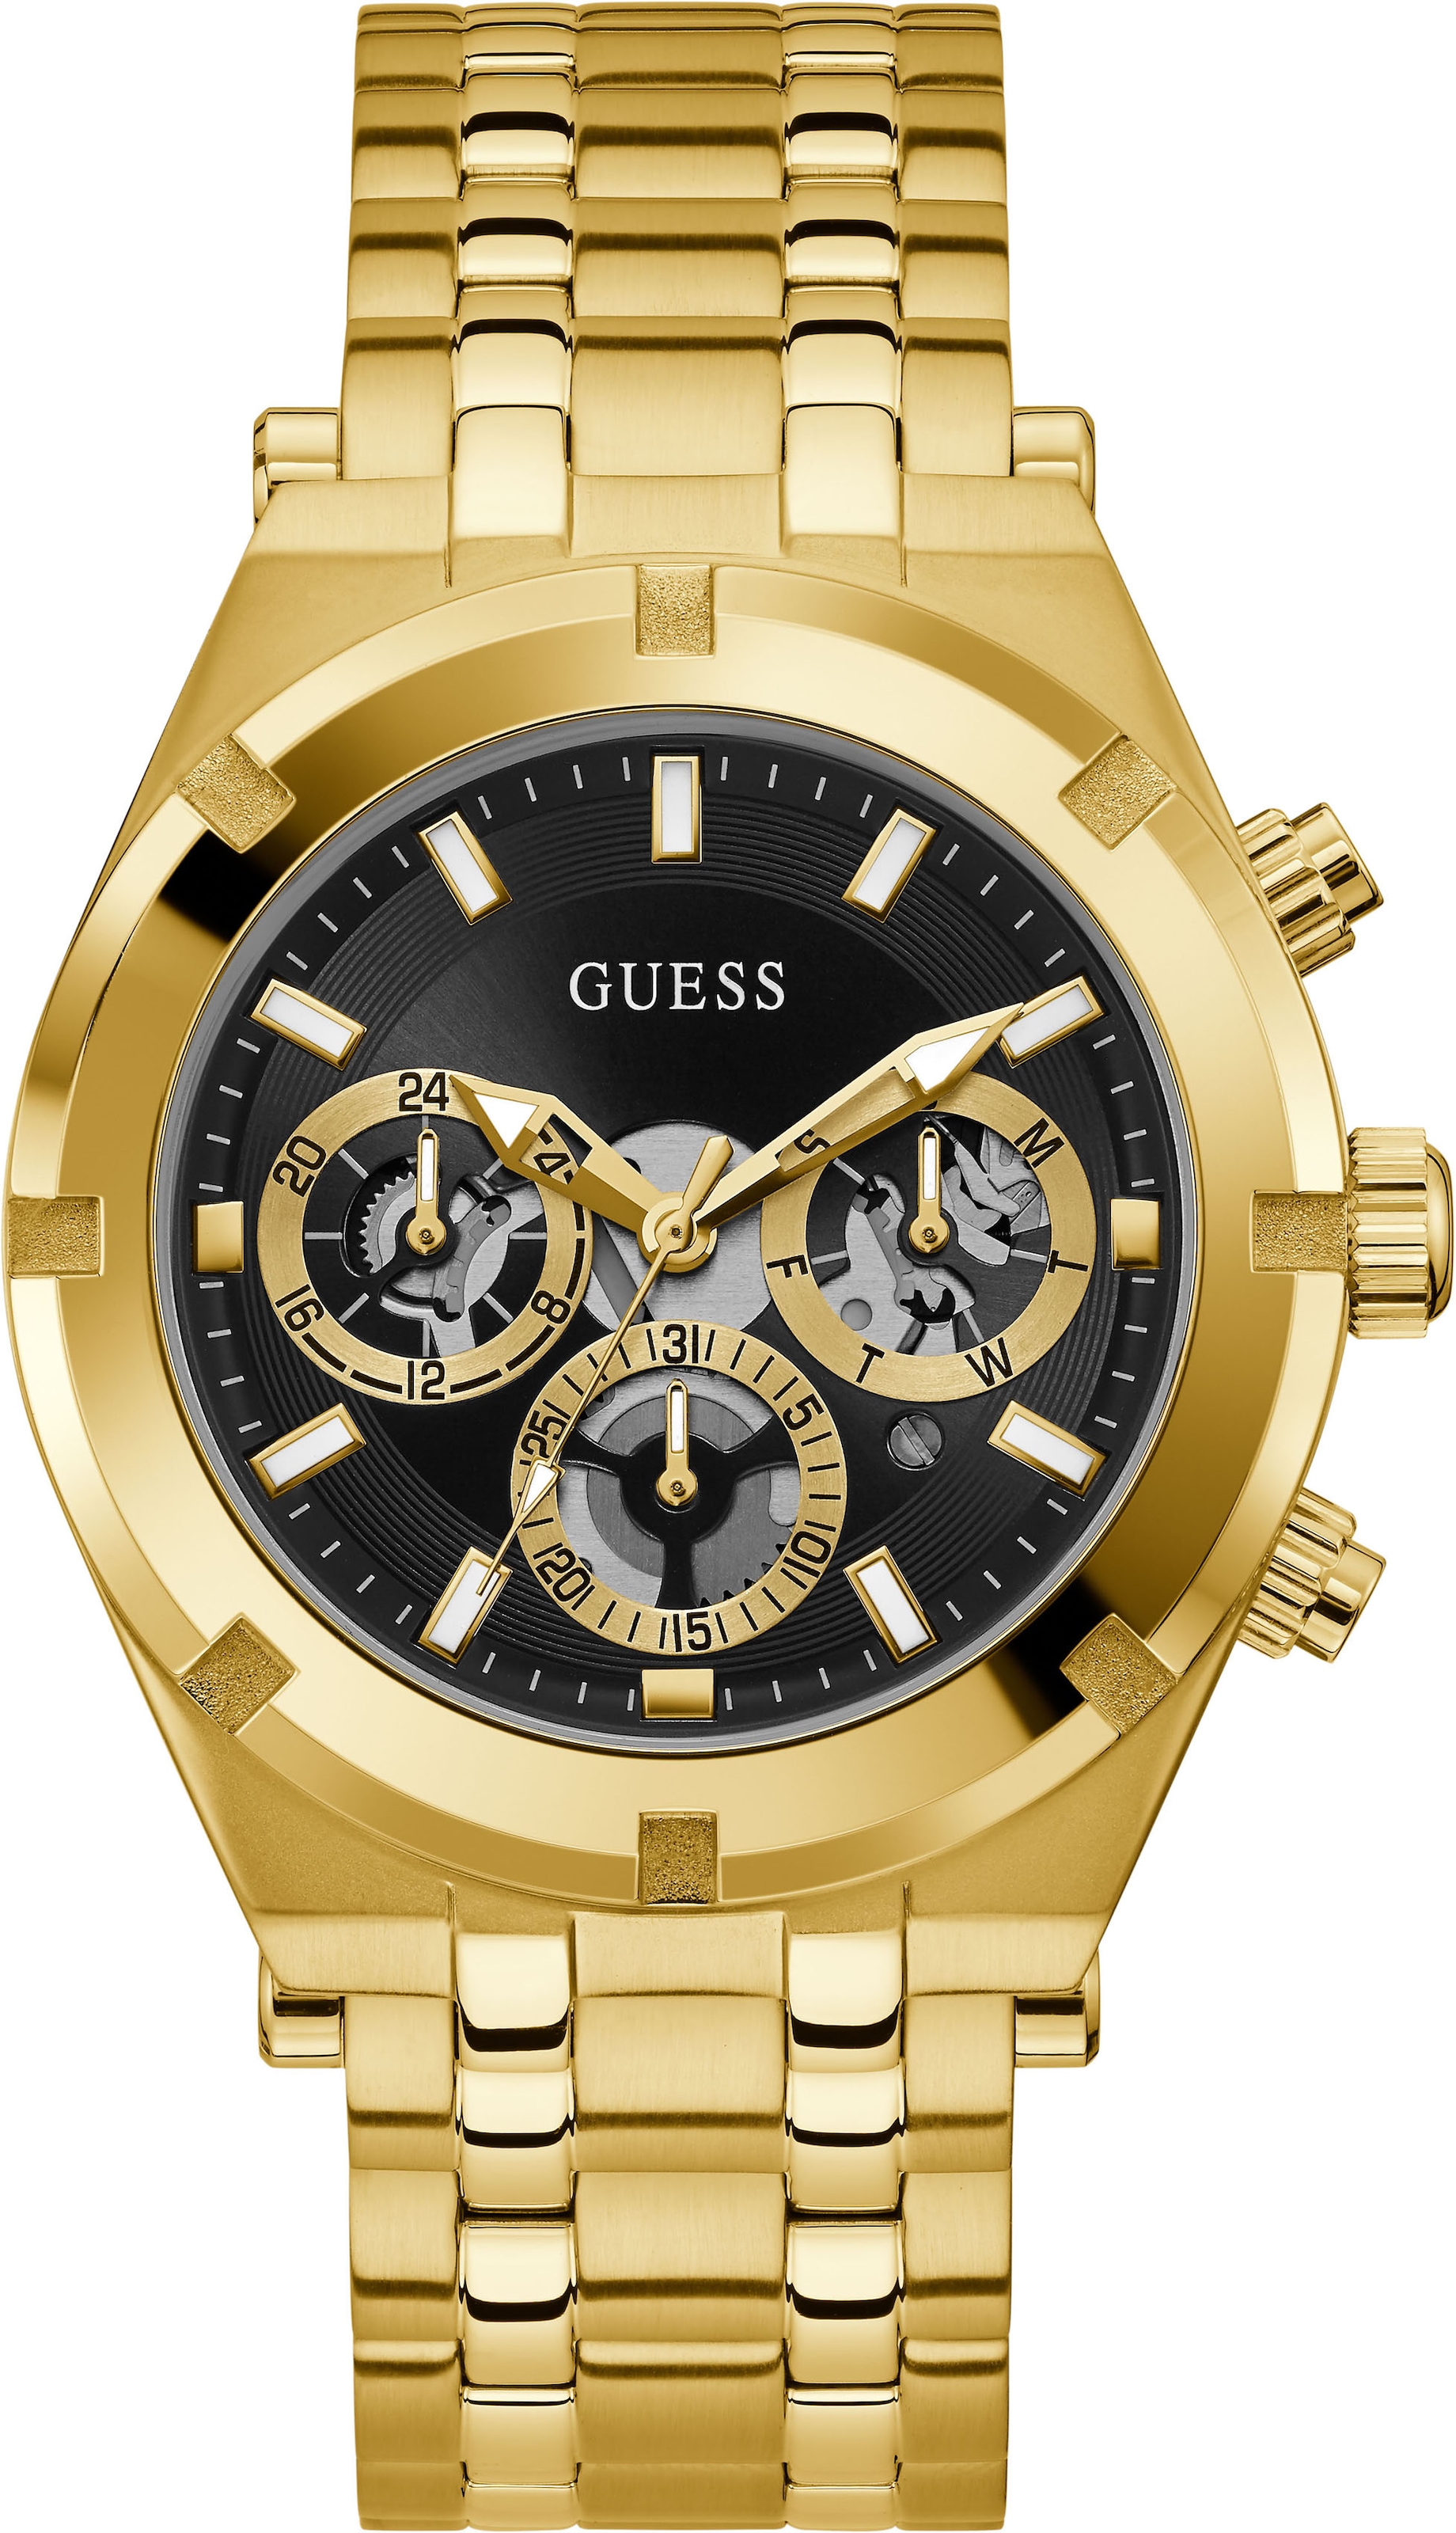 Guess Multifunktionsuhr »CONTINENTAL, GW0260G2« ♕ bei